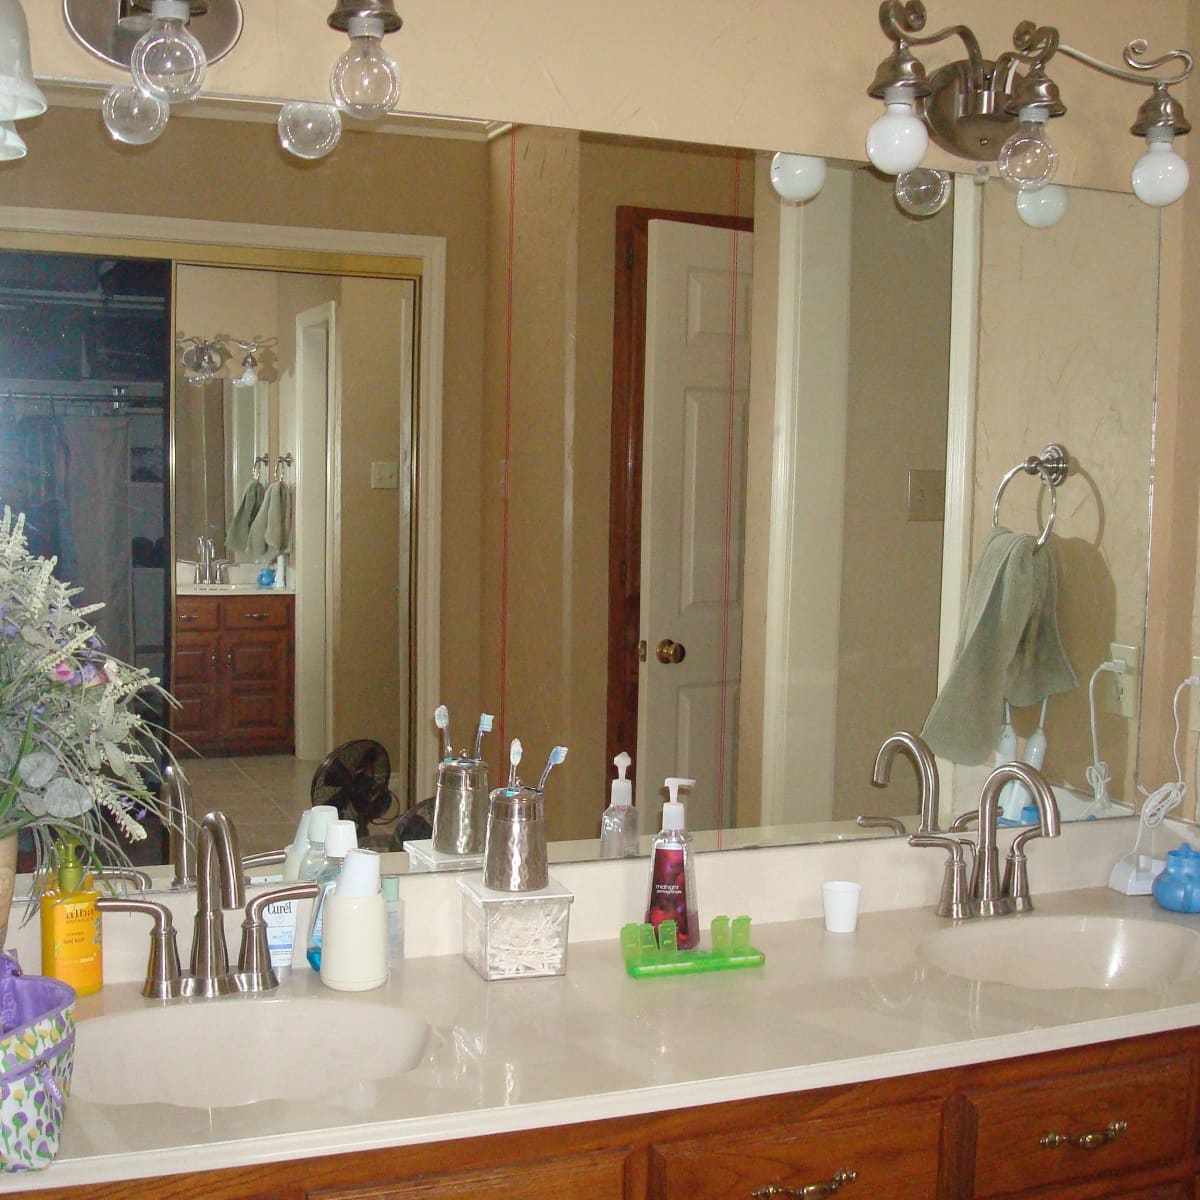 How We Remodeled Our Bathroom Vanity And Gave New Life To An Old Mirror Dengarden - How To Update An Old Bathroom Mirror